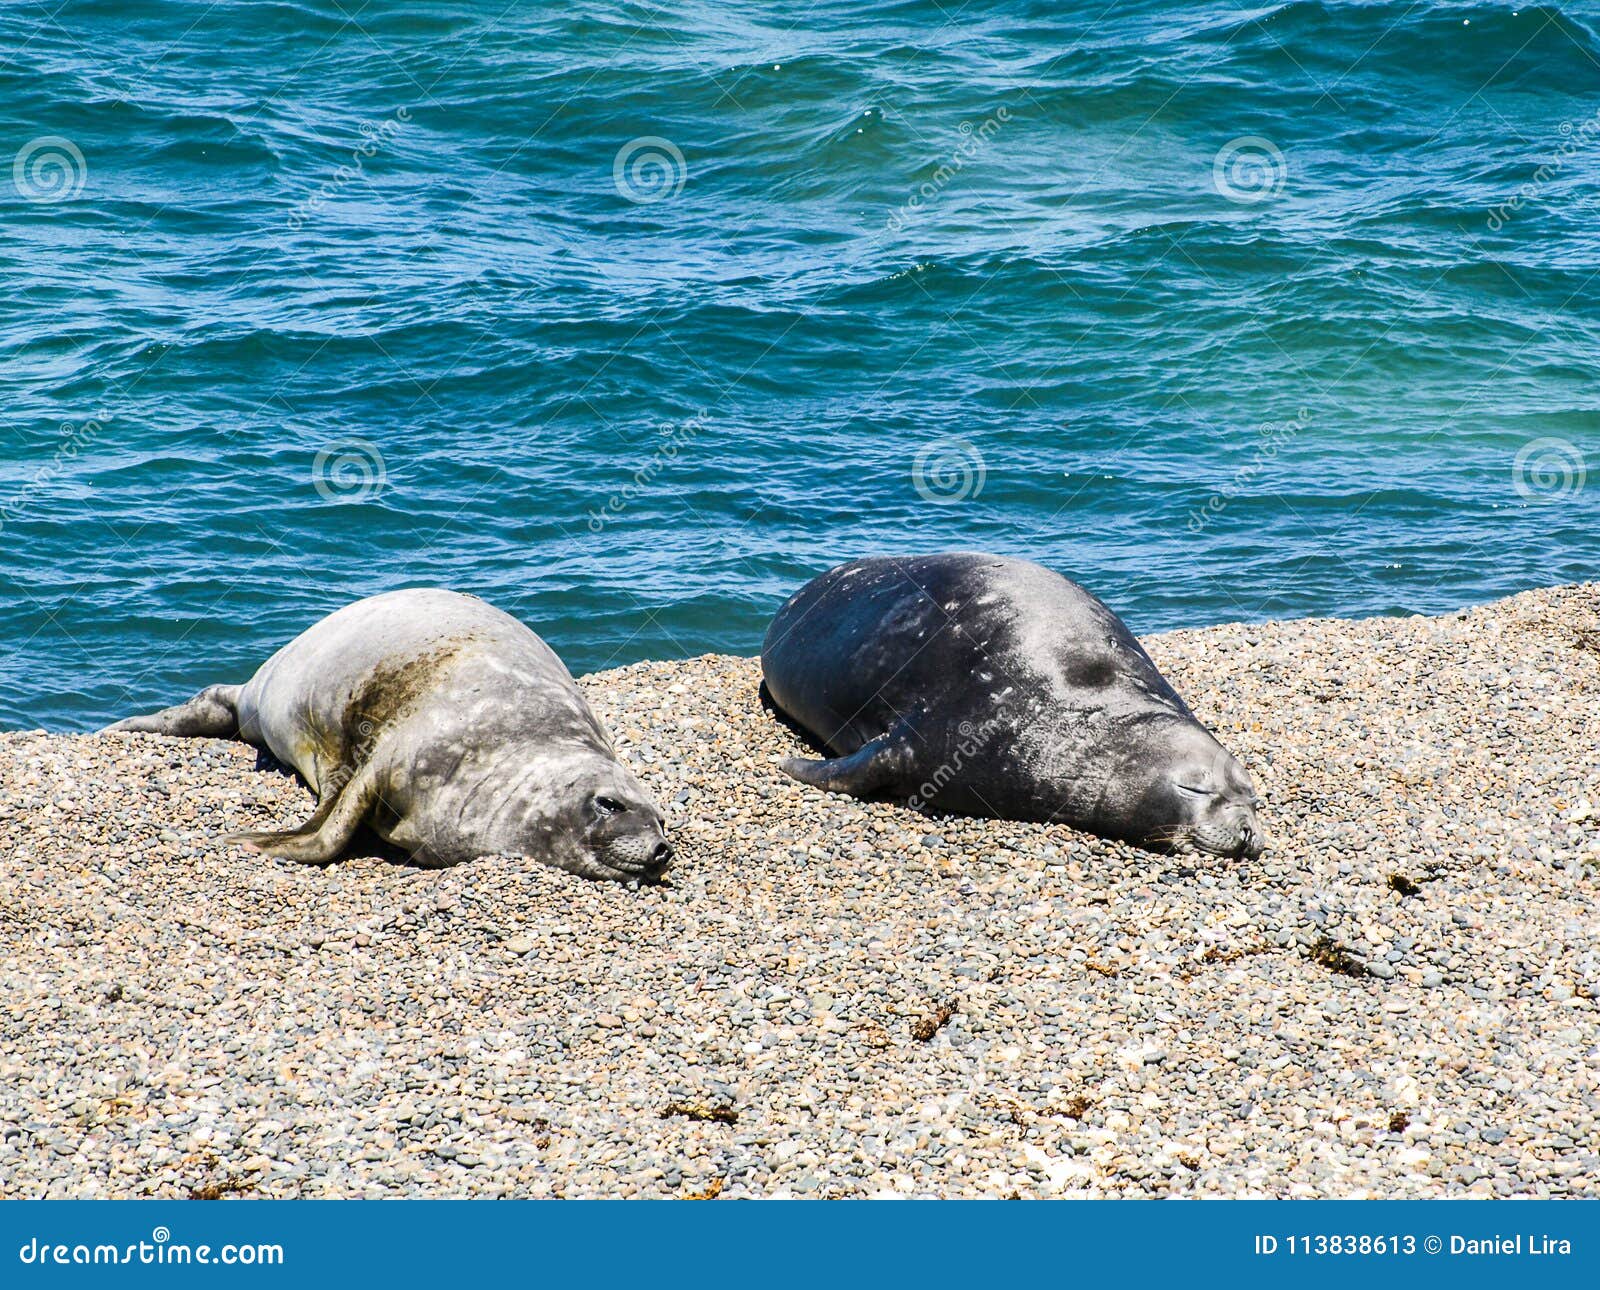 couple of elephant seal resting on the beach